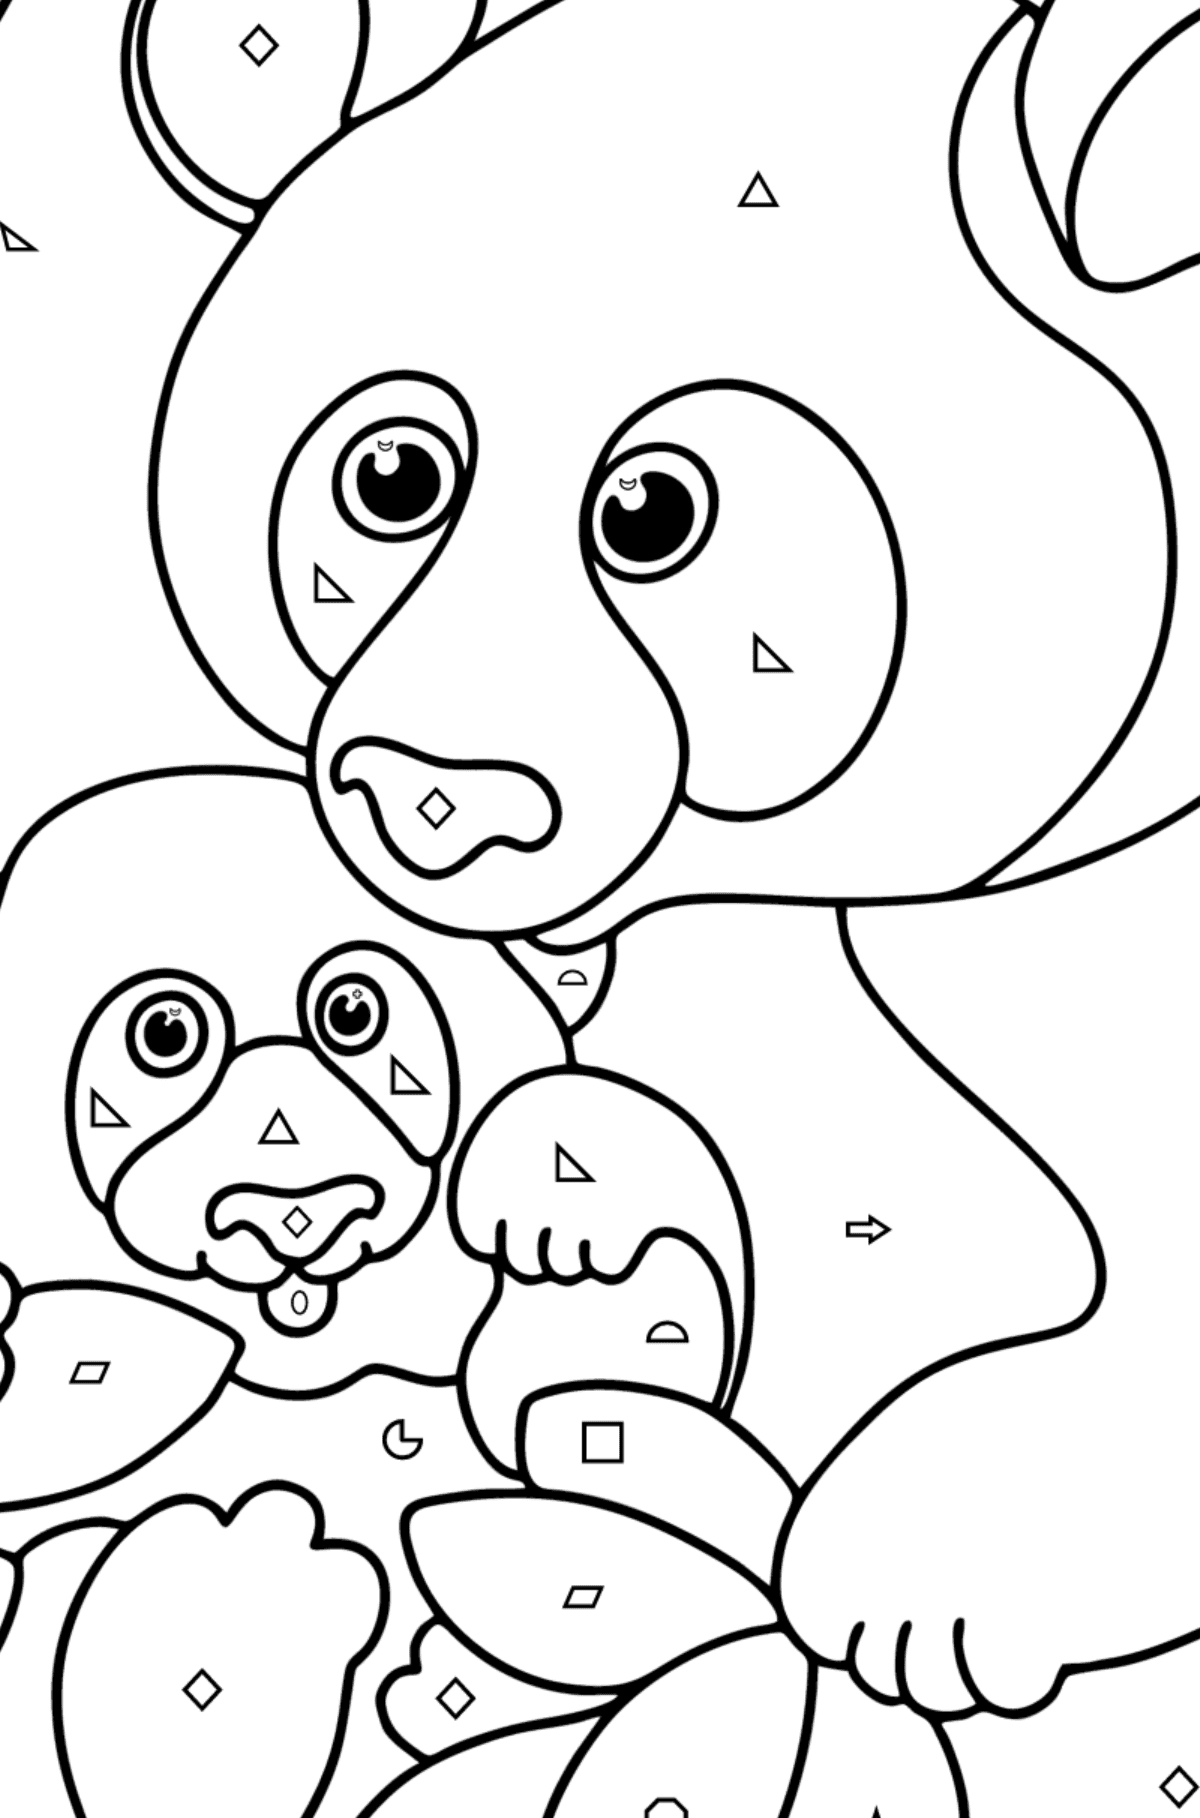 Giant panda with a cub coloring page - Coloring by Geometric Shapes for Kids